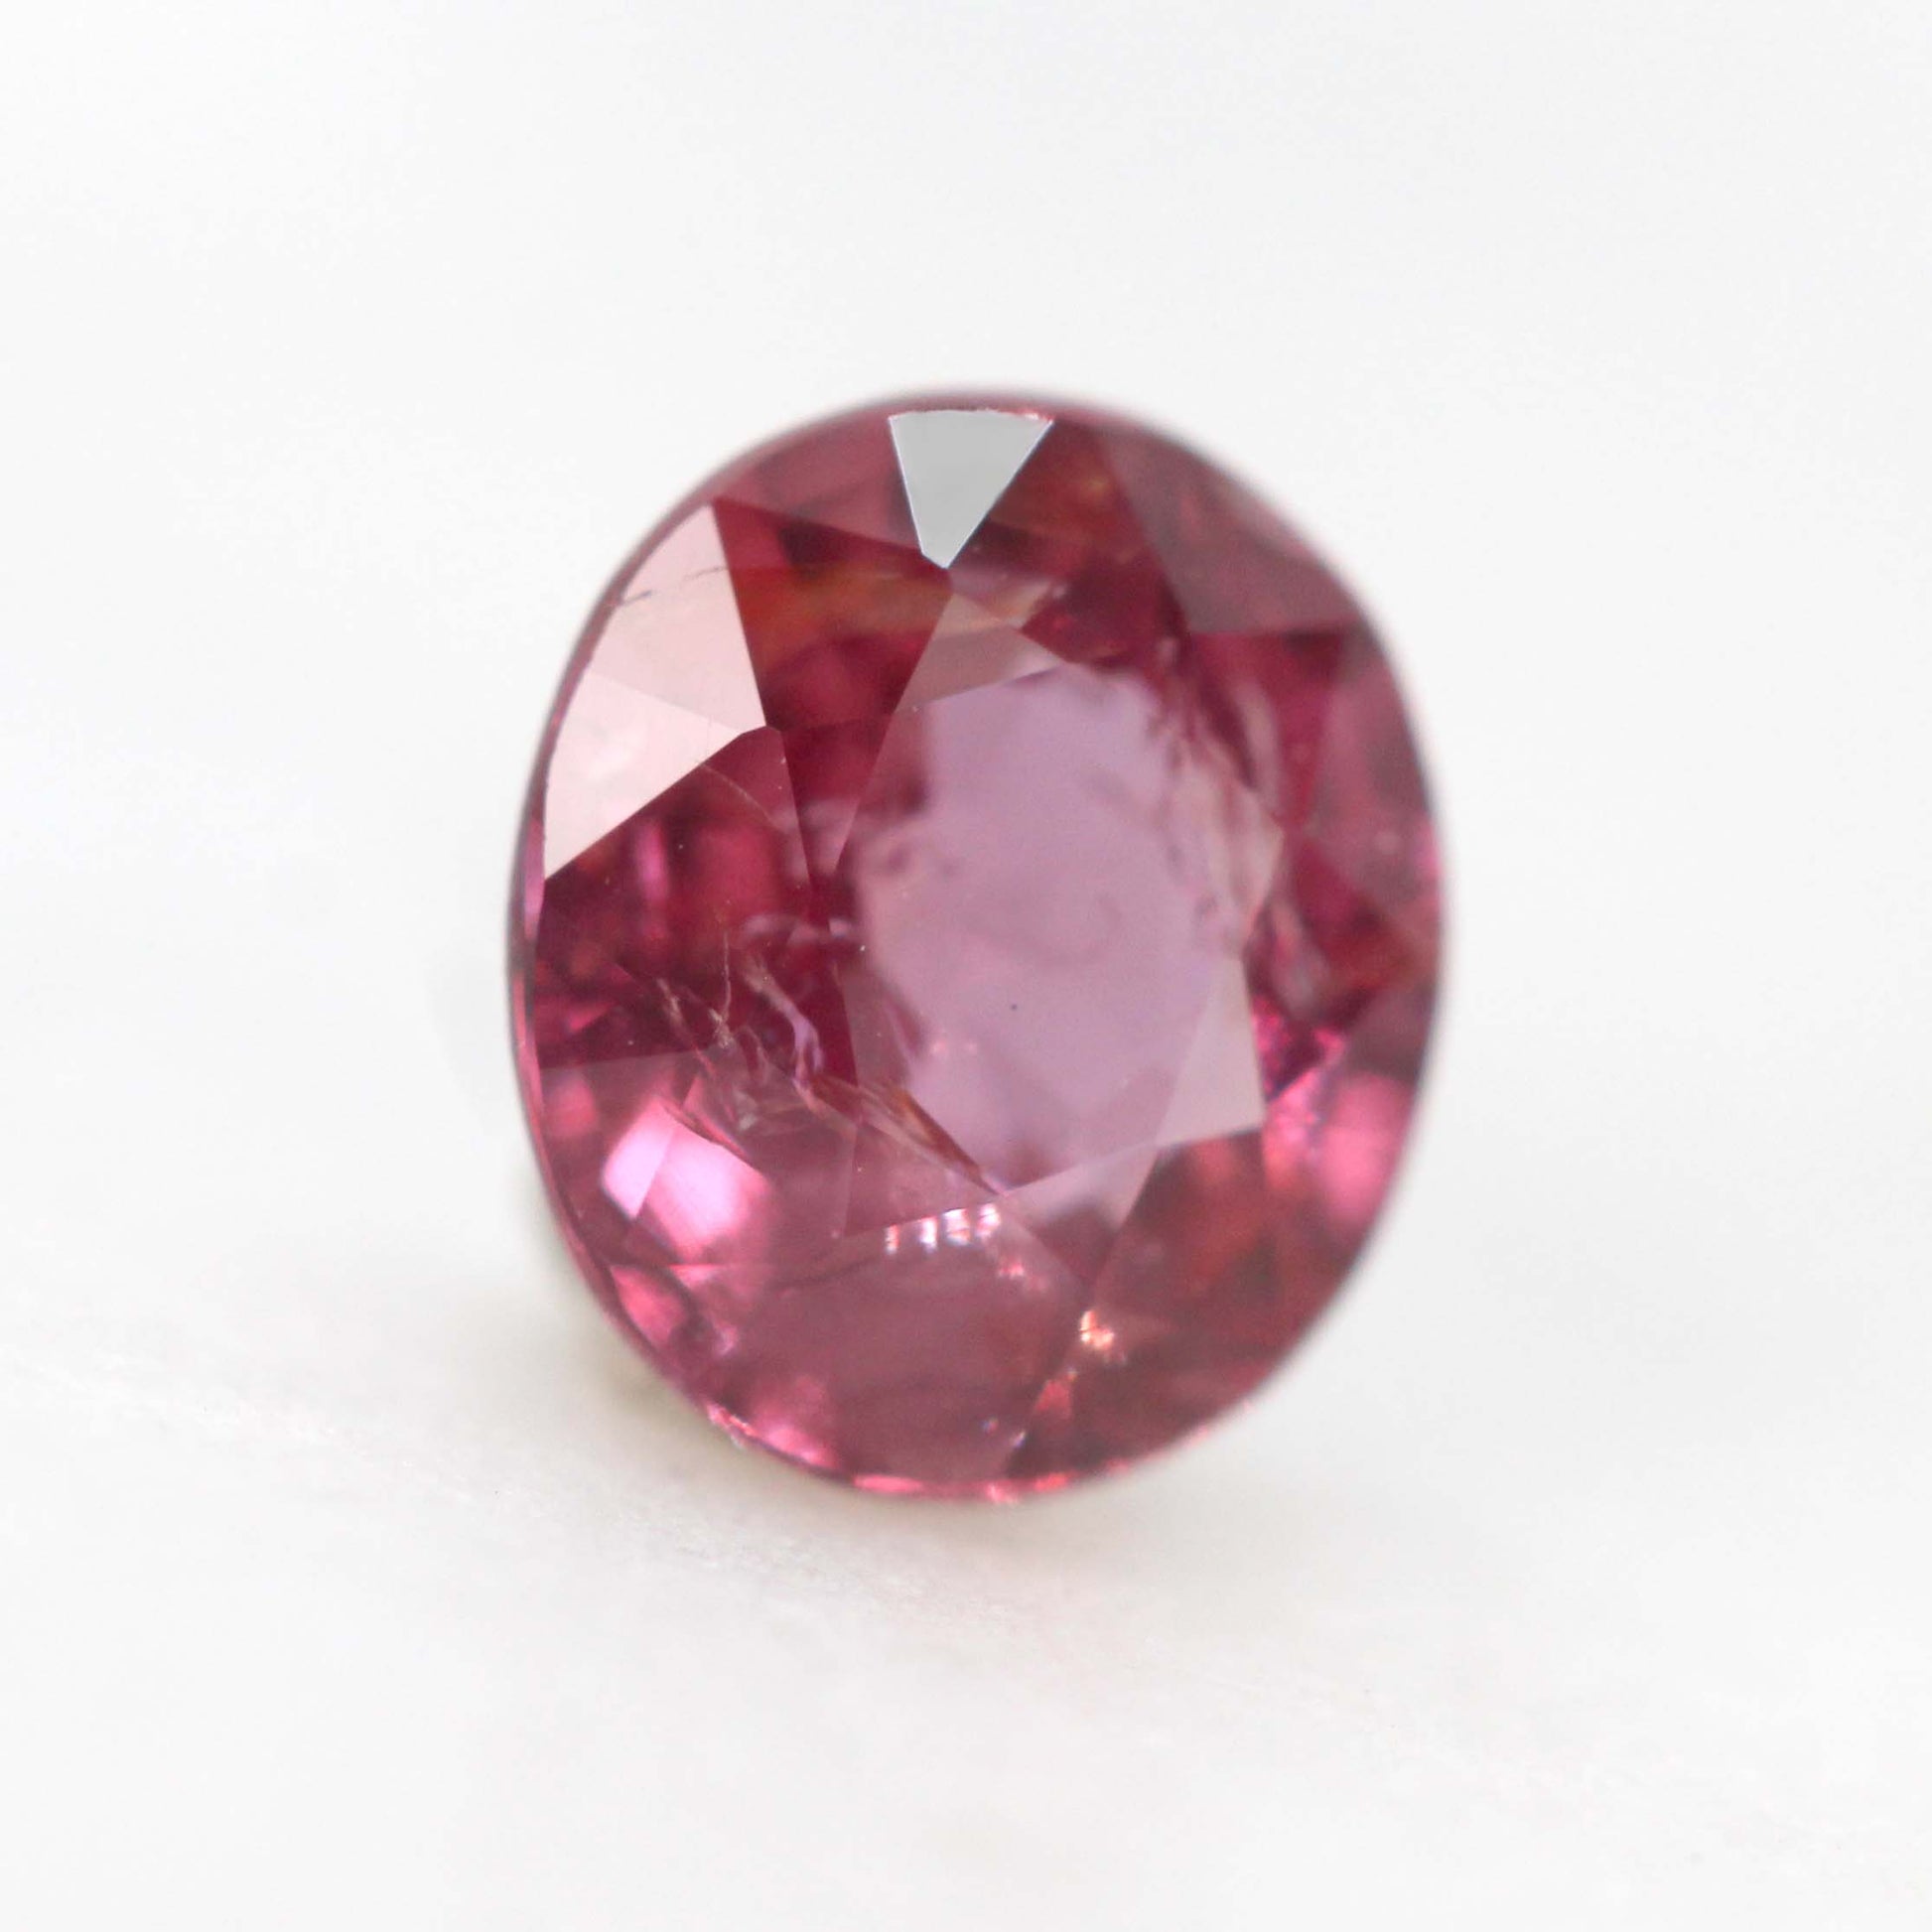 0.82 Carat Oval Red Pink Sapphire for Custom Work - Inventory Code PROS082 - Midwinter Co. Alternative Bridal Rings and Modern Fine Jewelry